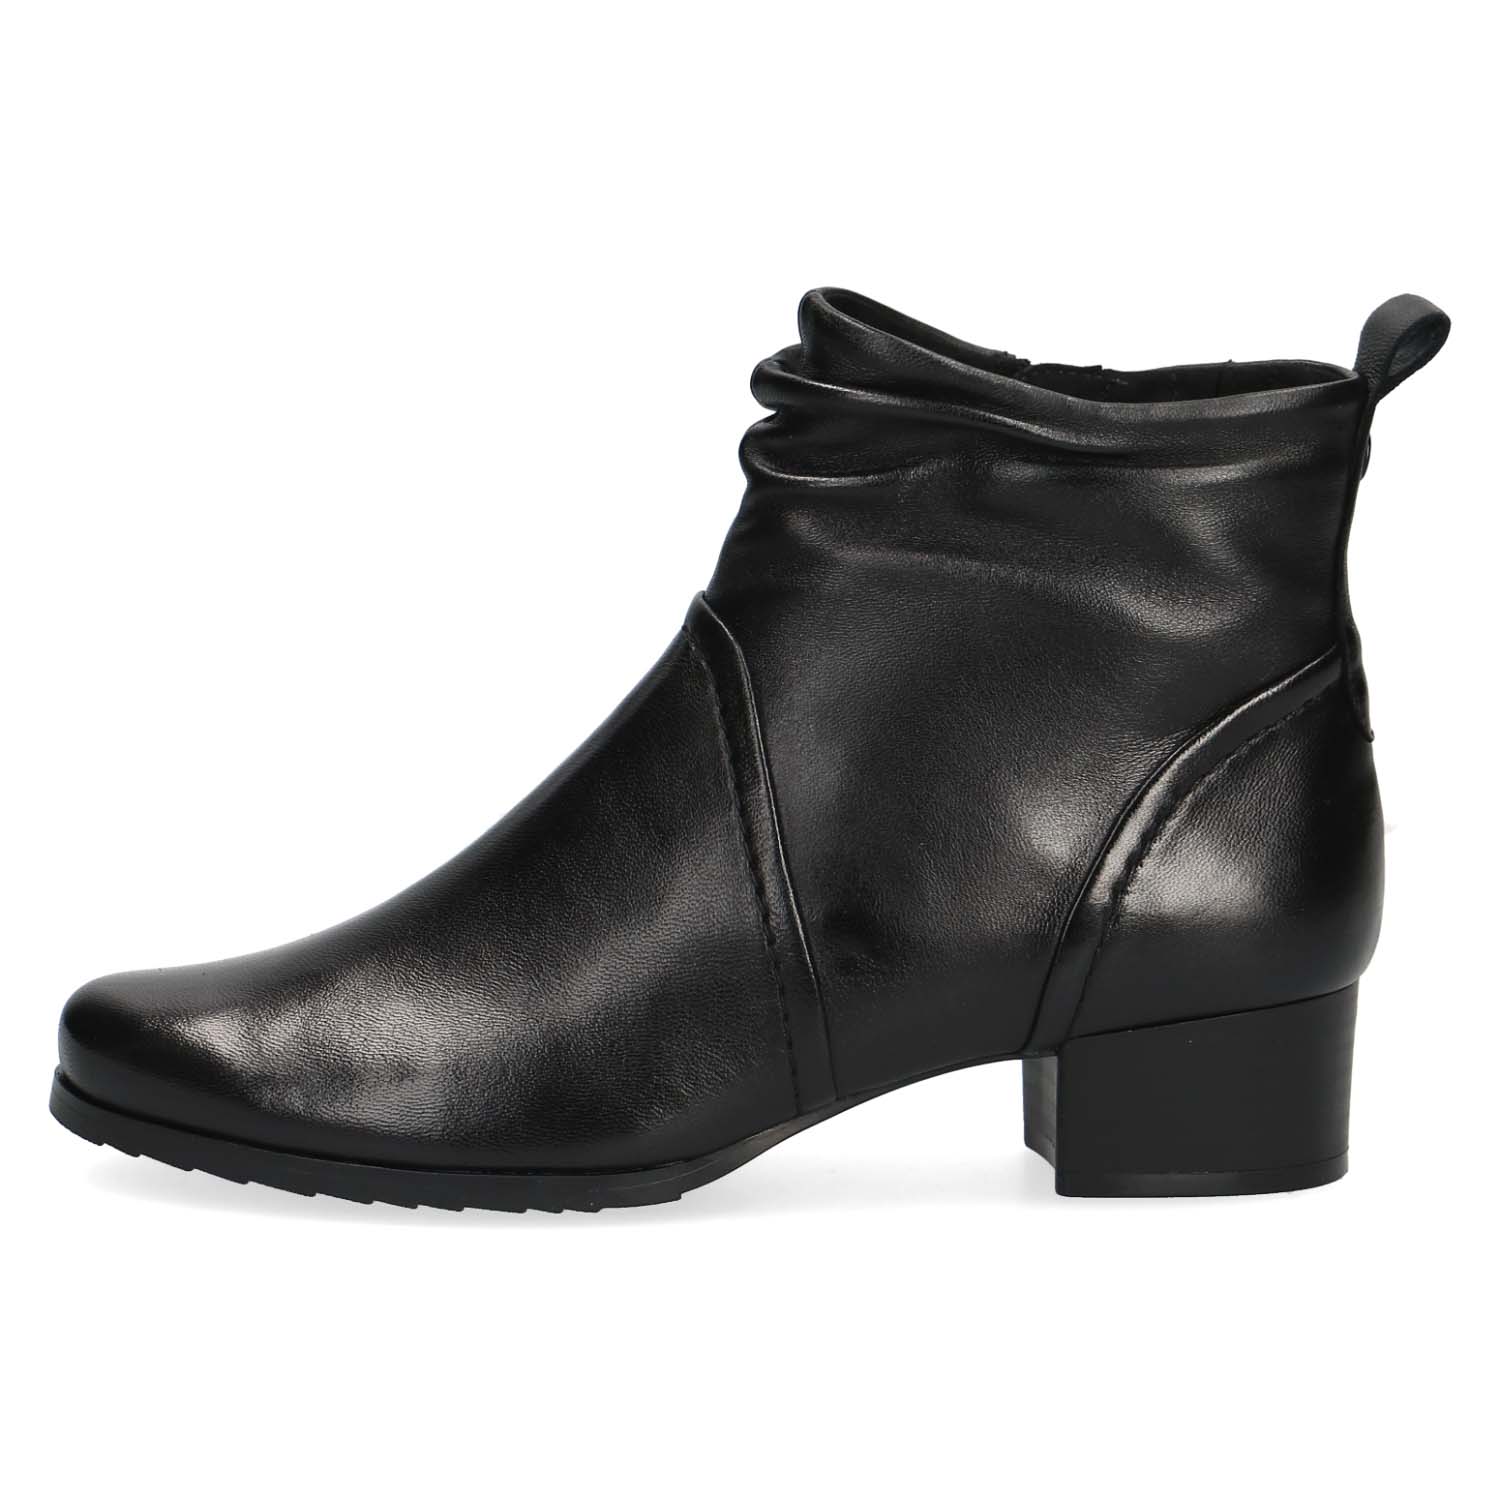 Front view of the Caprice Super Soft Leather Ankle Boot.